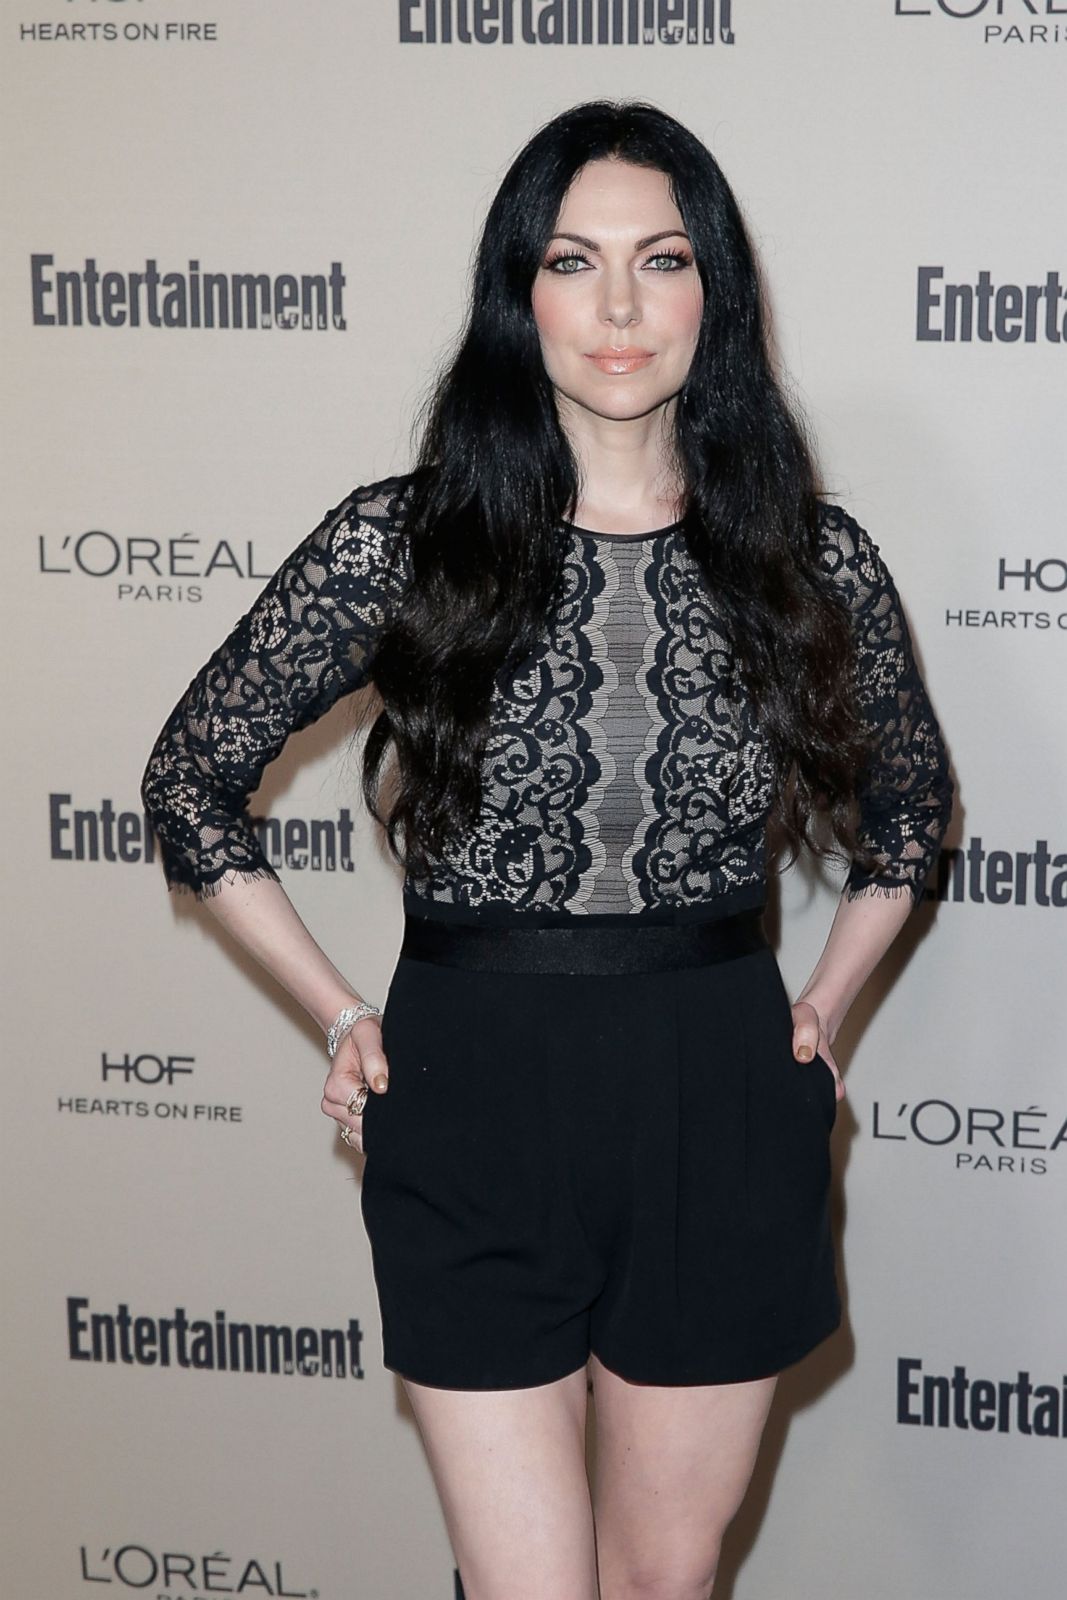 Laura Prepon Picture | 12 Celebrities Who've Been Affiliated With the Church of ...1067 x 1600